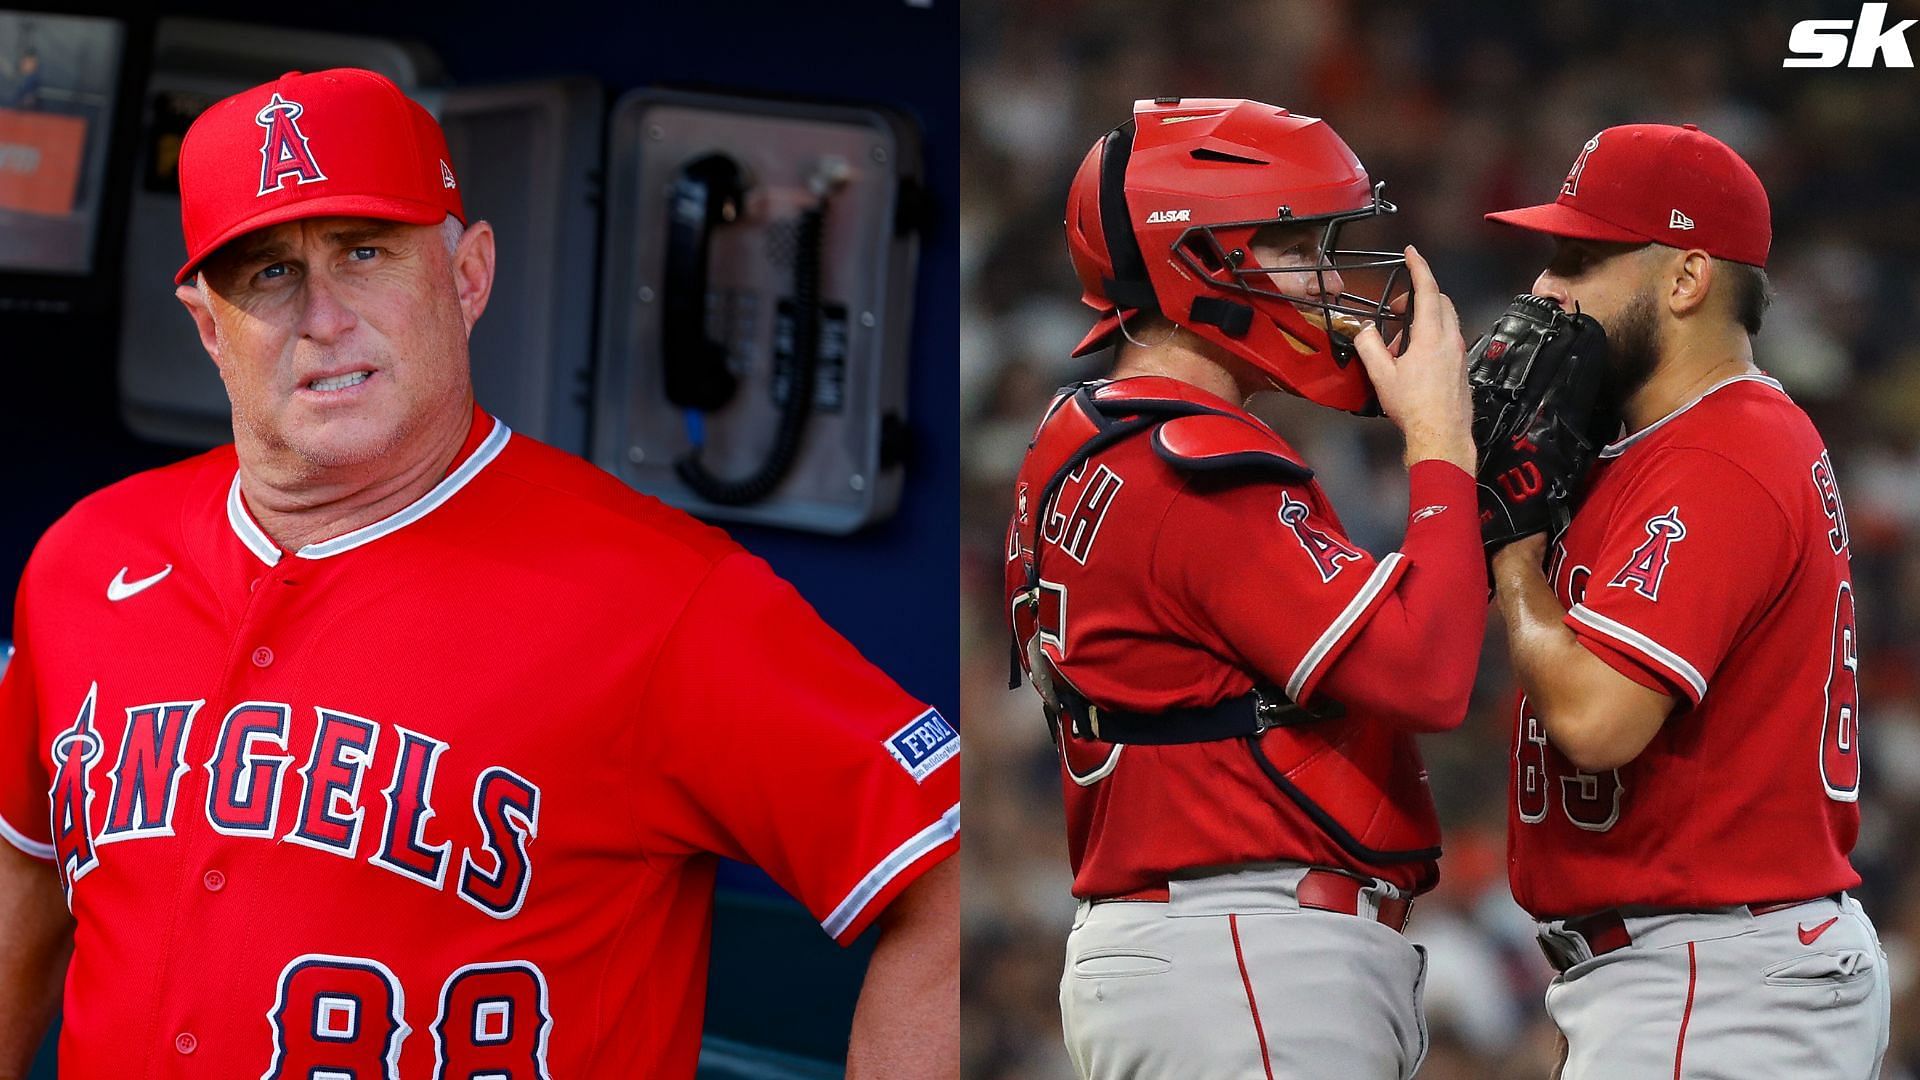 Phil Nevin gets furious at the Angels after team suffers shutout loss against the Rangers